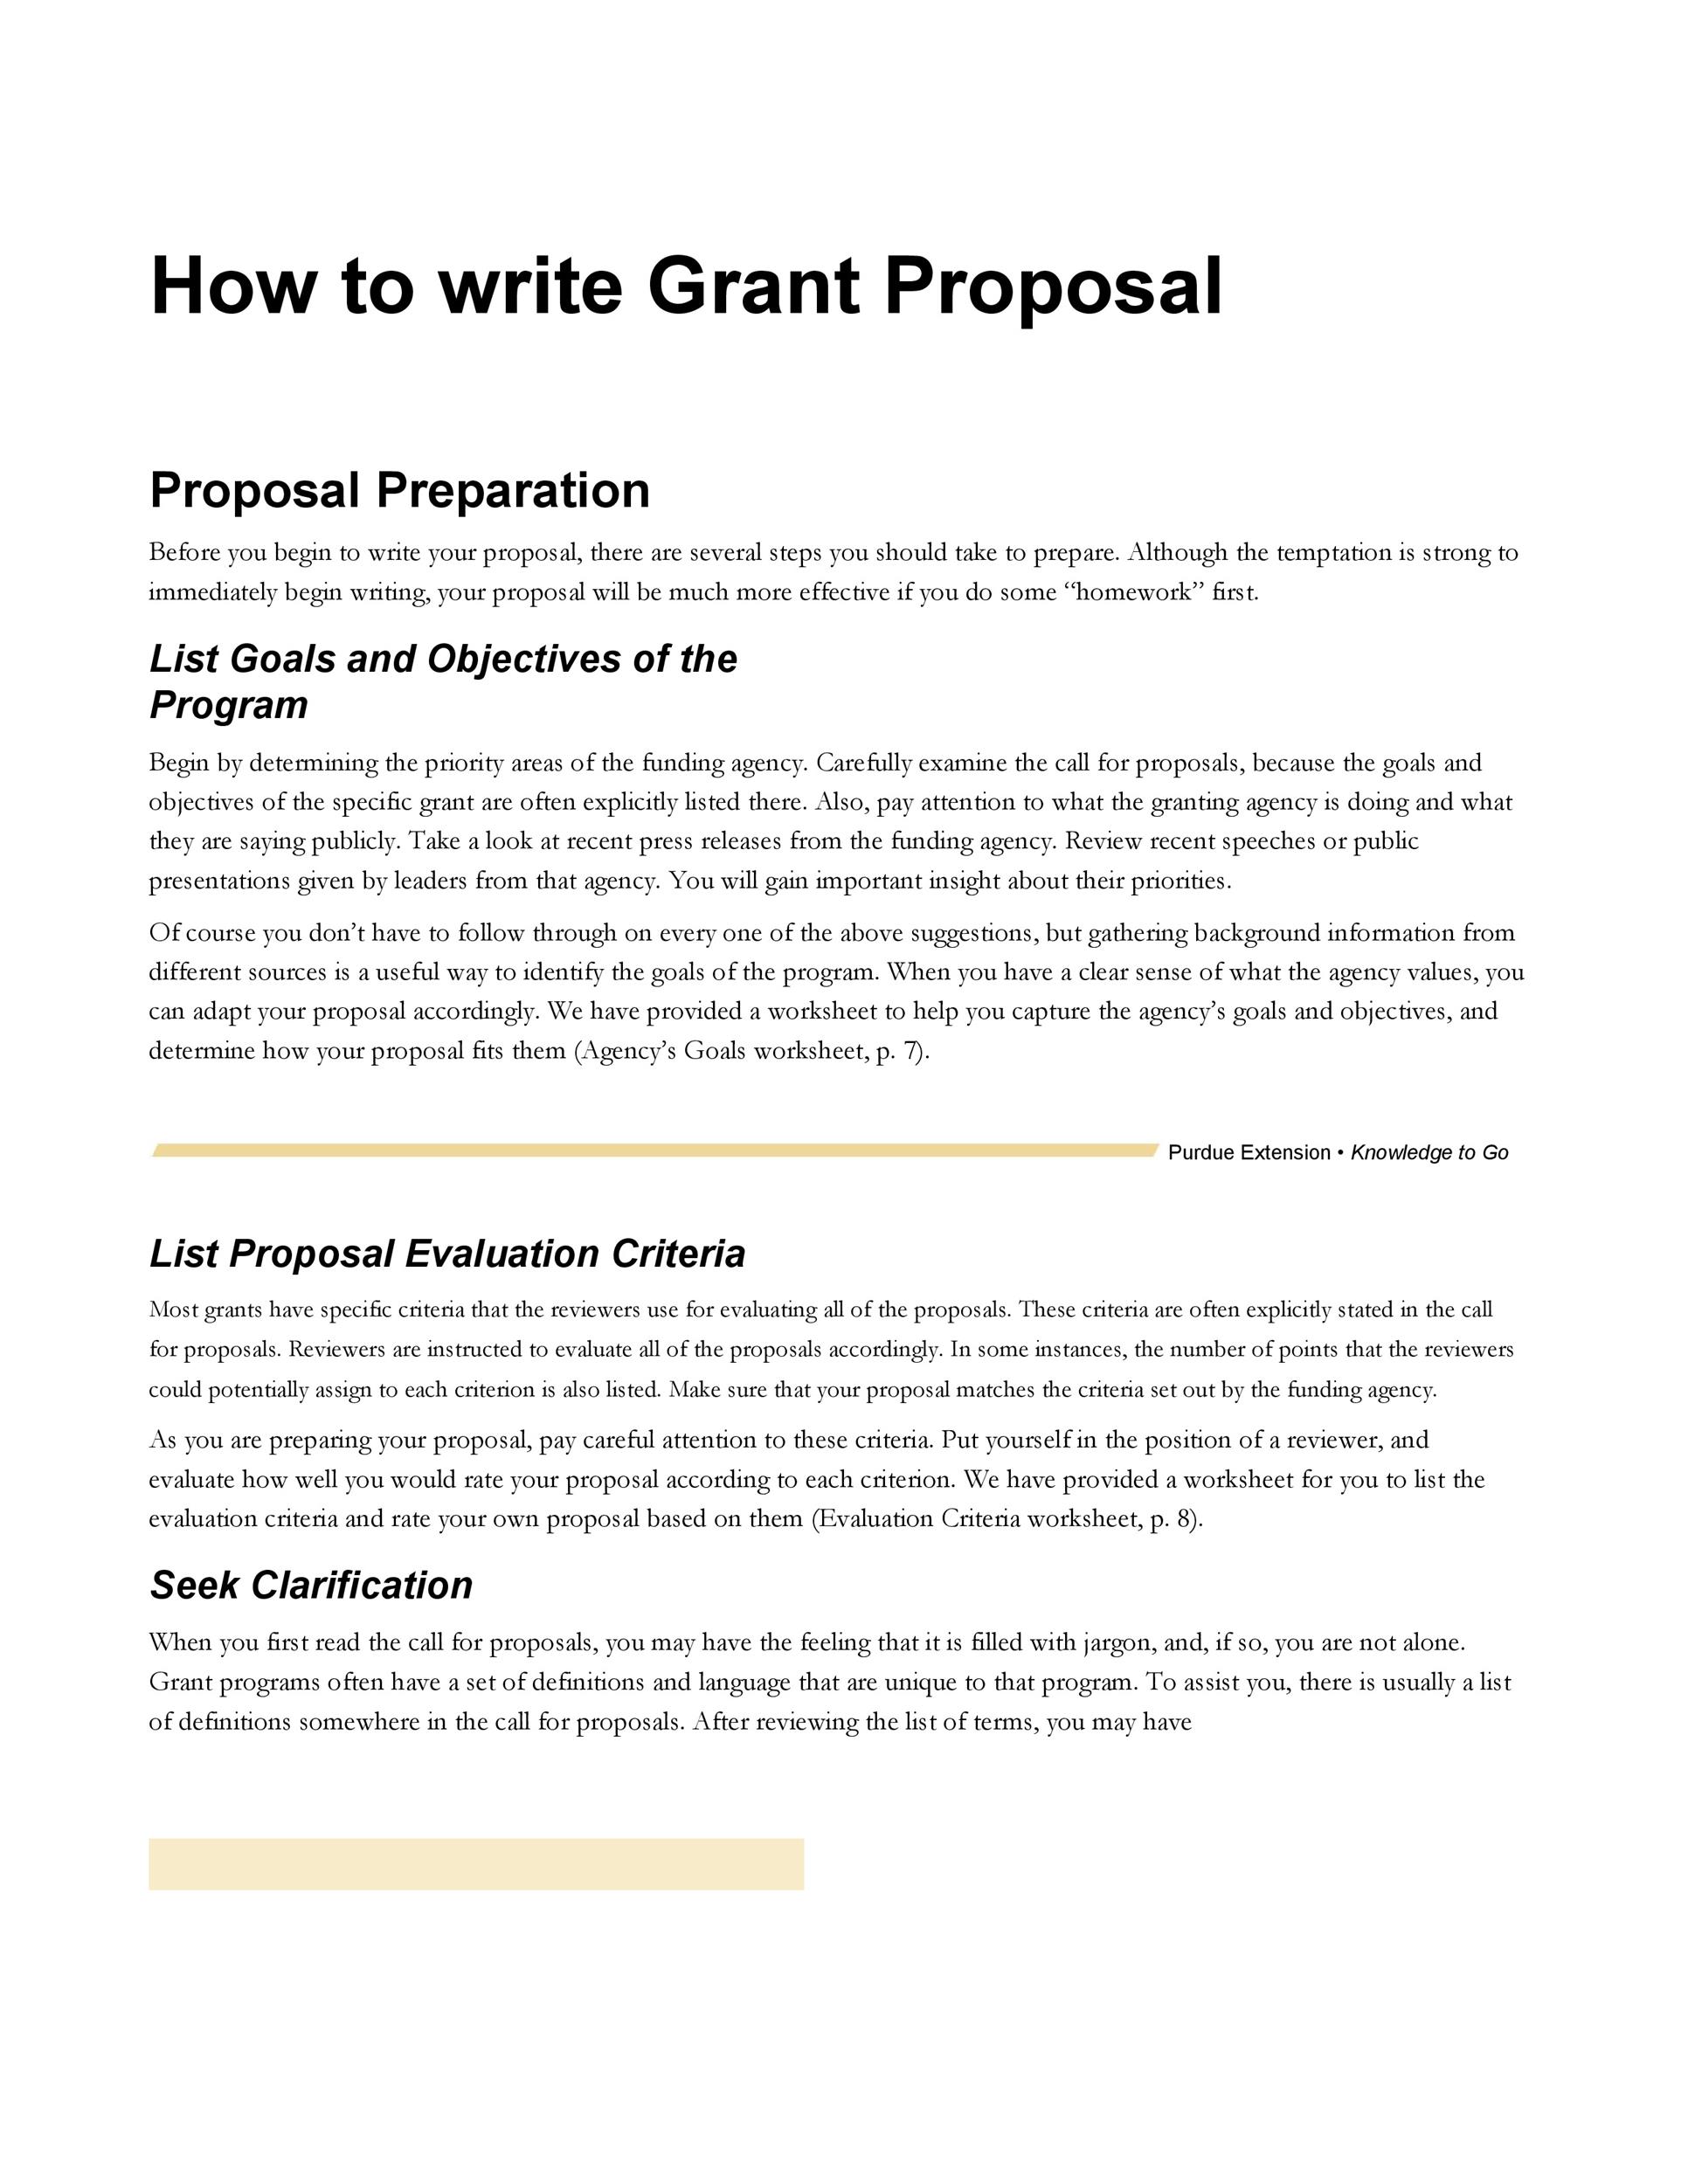 research-grant-proposal-template